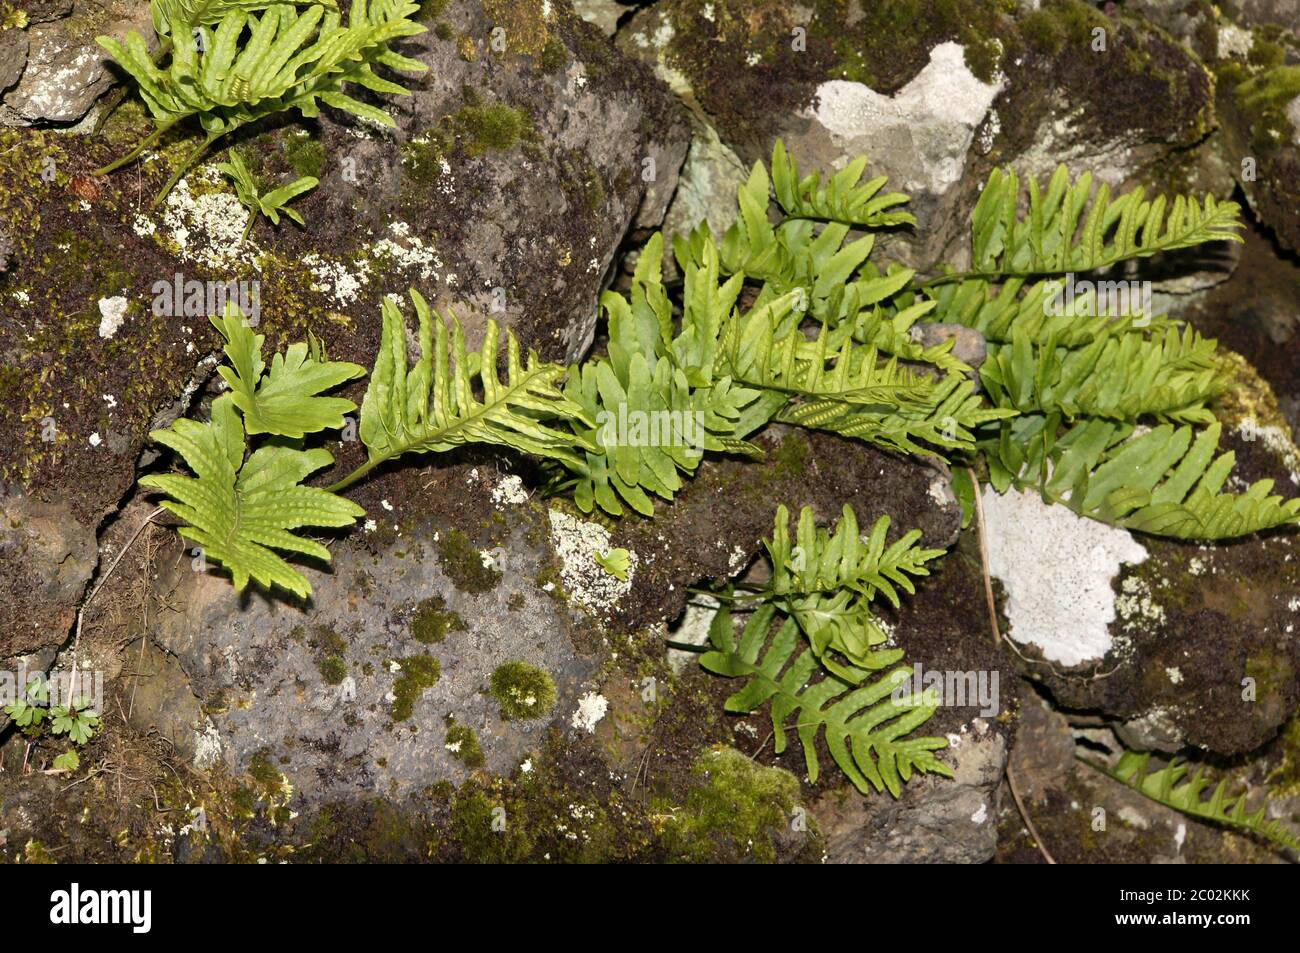 Southern spotted fern (Polypodium cambricum) Stock Photo